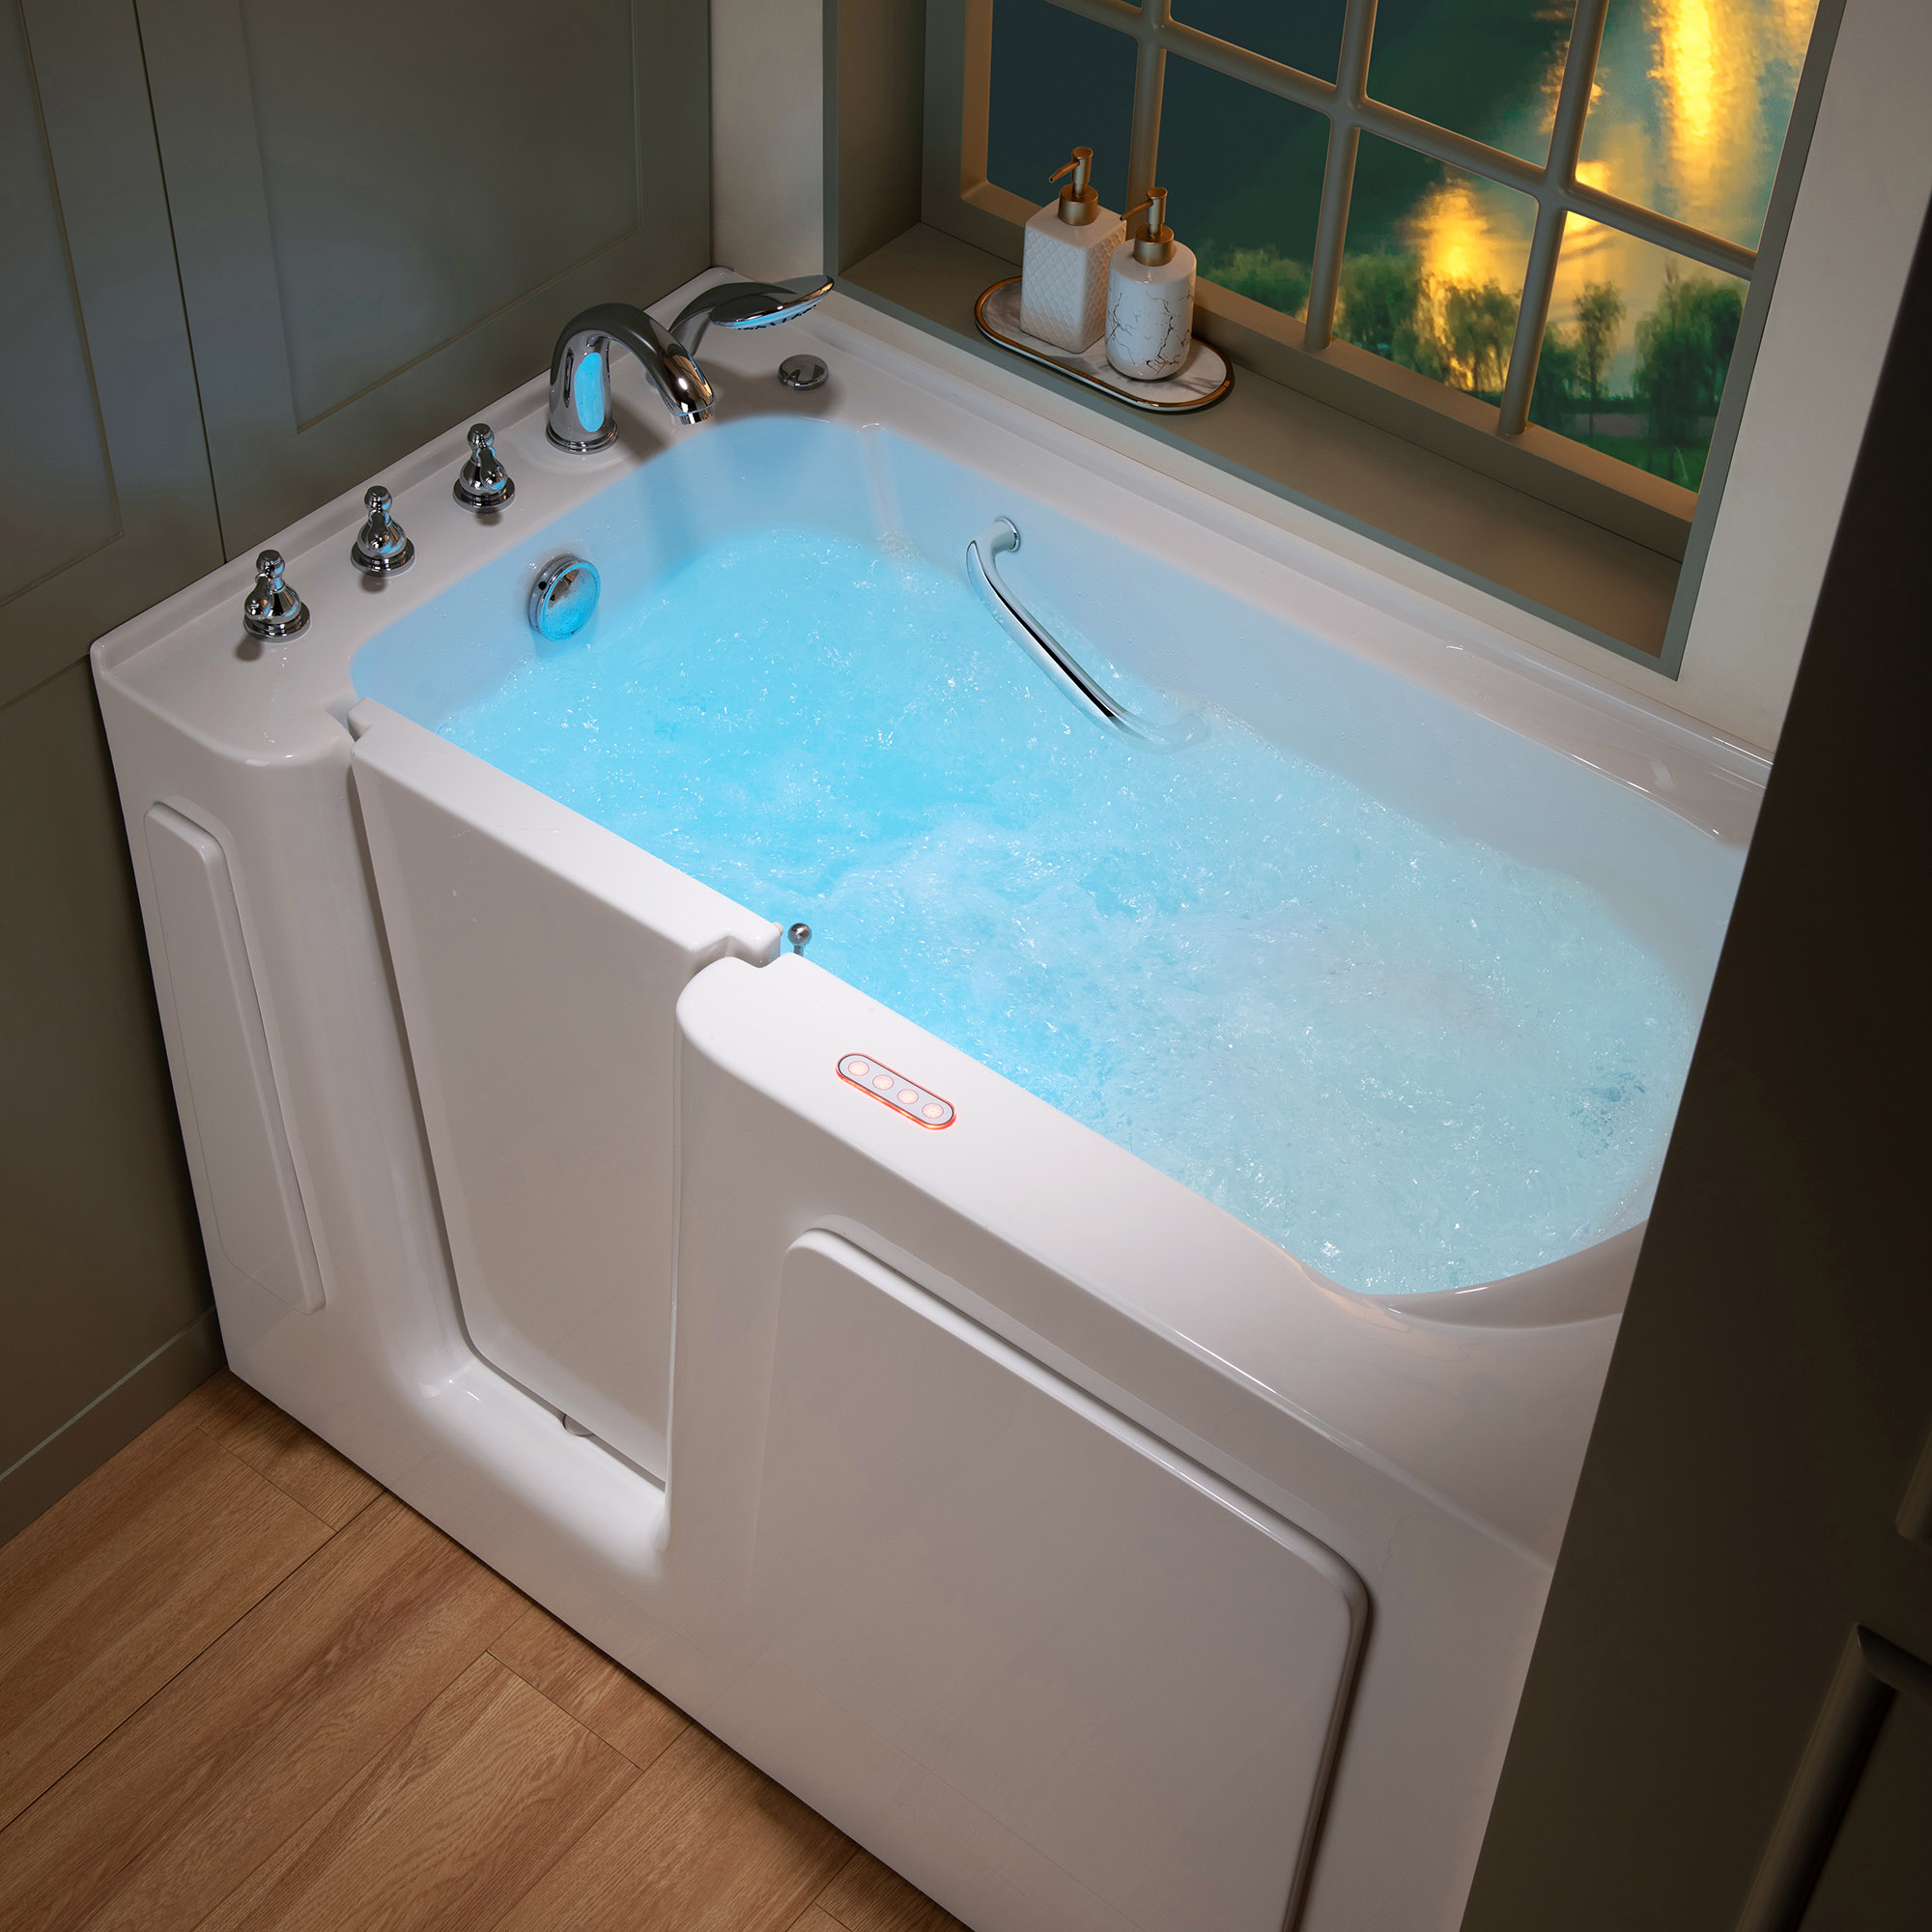  WOODBRIDGE 54 in. x 30 in. Left Hand Walk-In Air & Whirlpool Jets Hot Tub With Quick Fill Faucet with Hand Shower, White High Glass Acrylic Tub with Computer Control Panel, WB543038L_11601